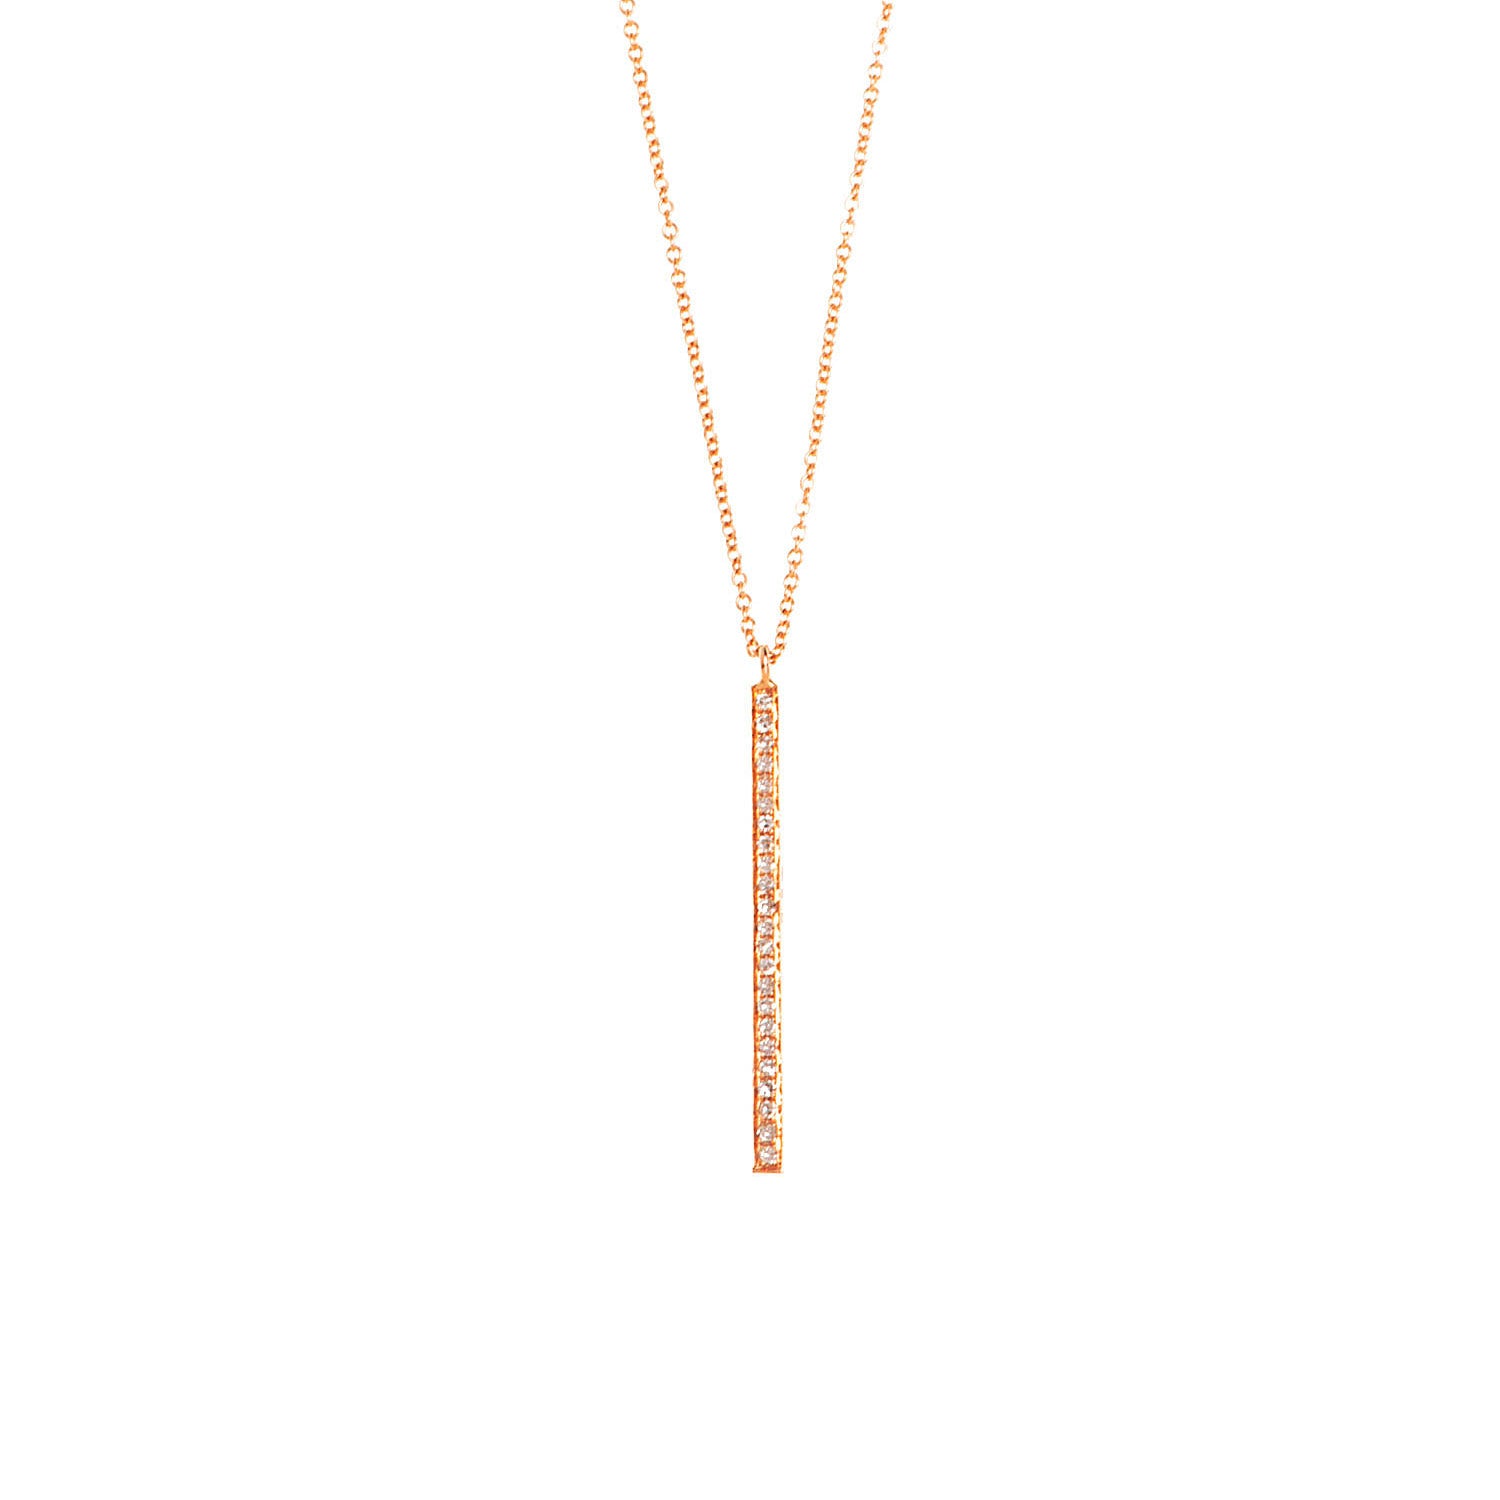 Gold and Diamond necklace. Diamond line necklace. Yellow gold necklace. Χρυσό κολιέ. Κολιέ με διαμάντια. Γραμμή με διαμάντια.